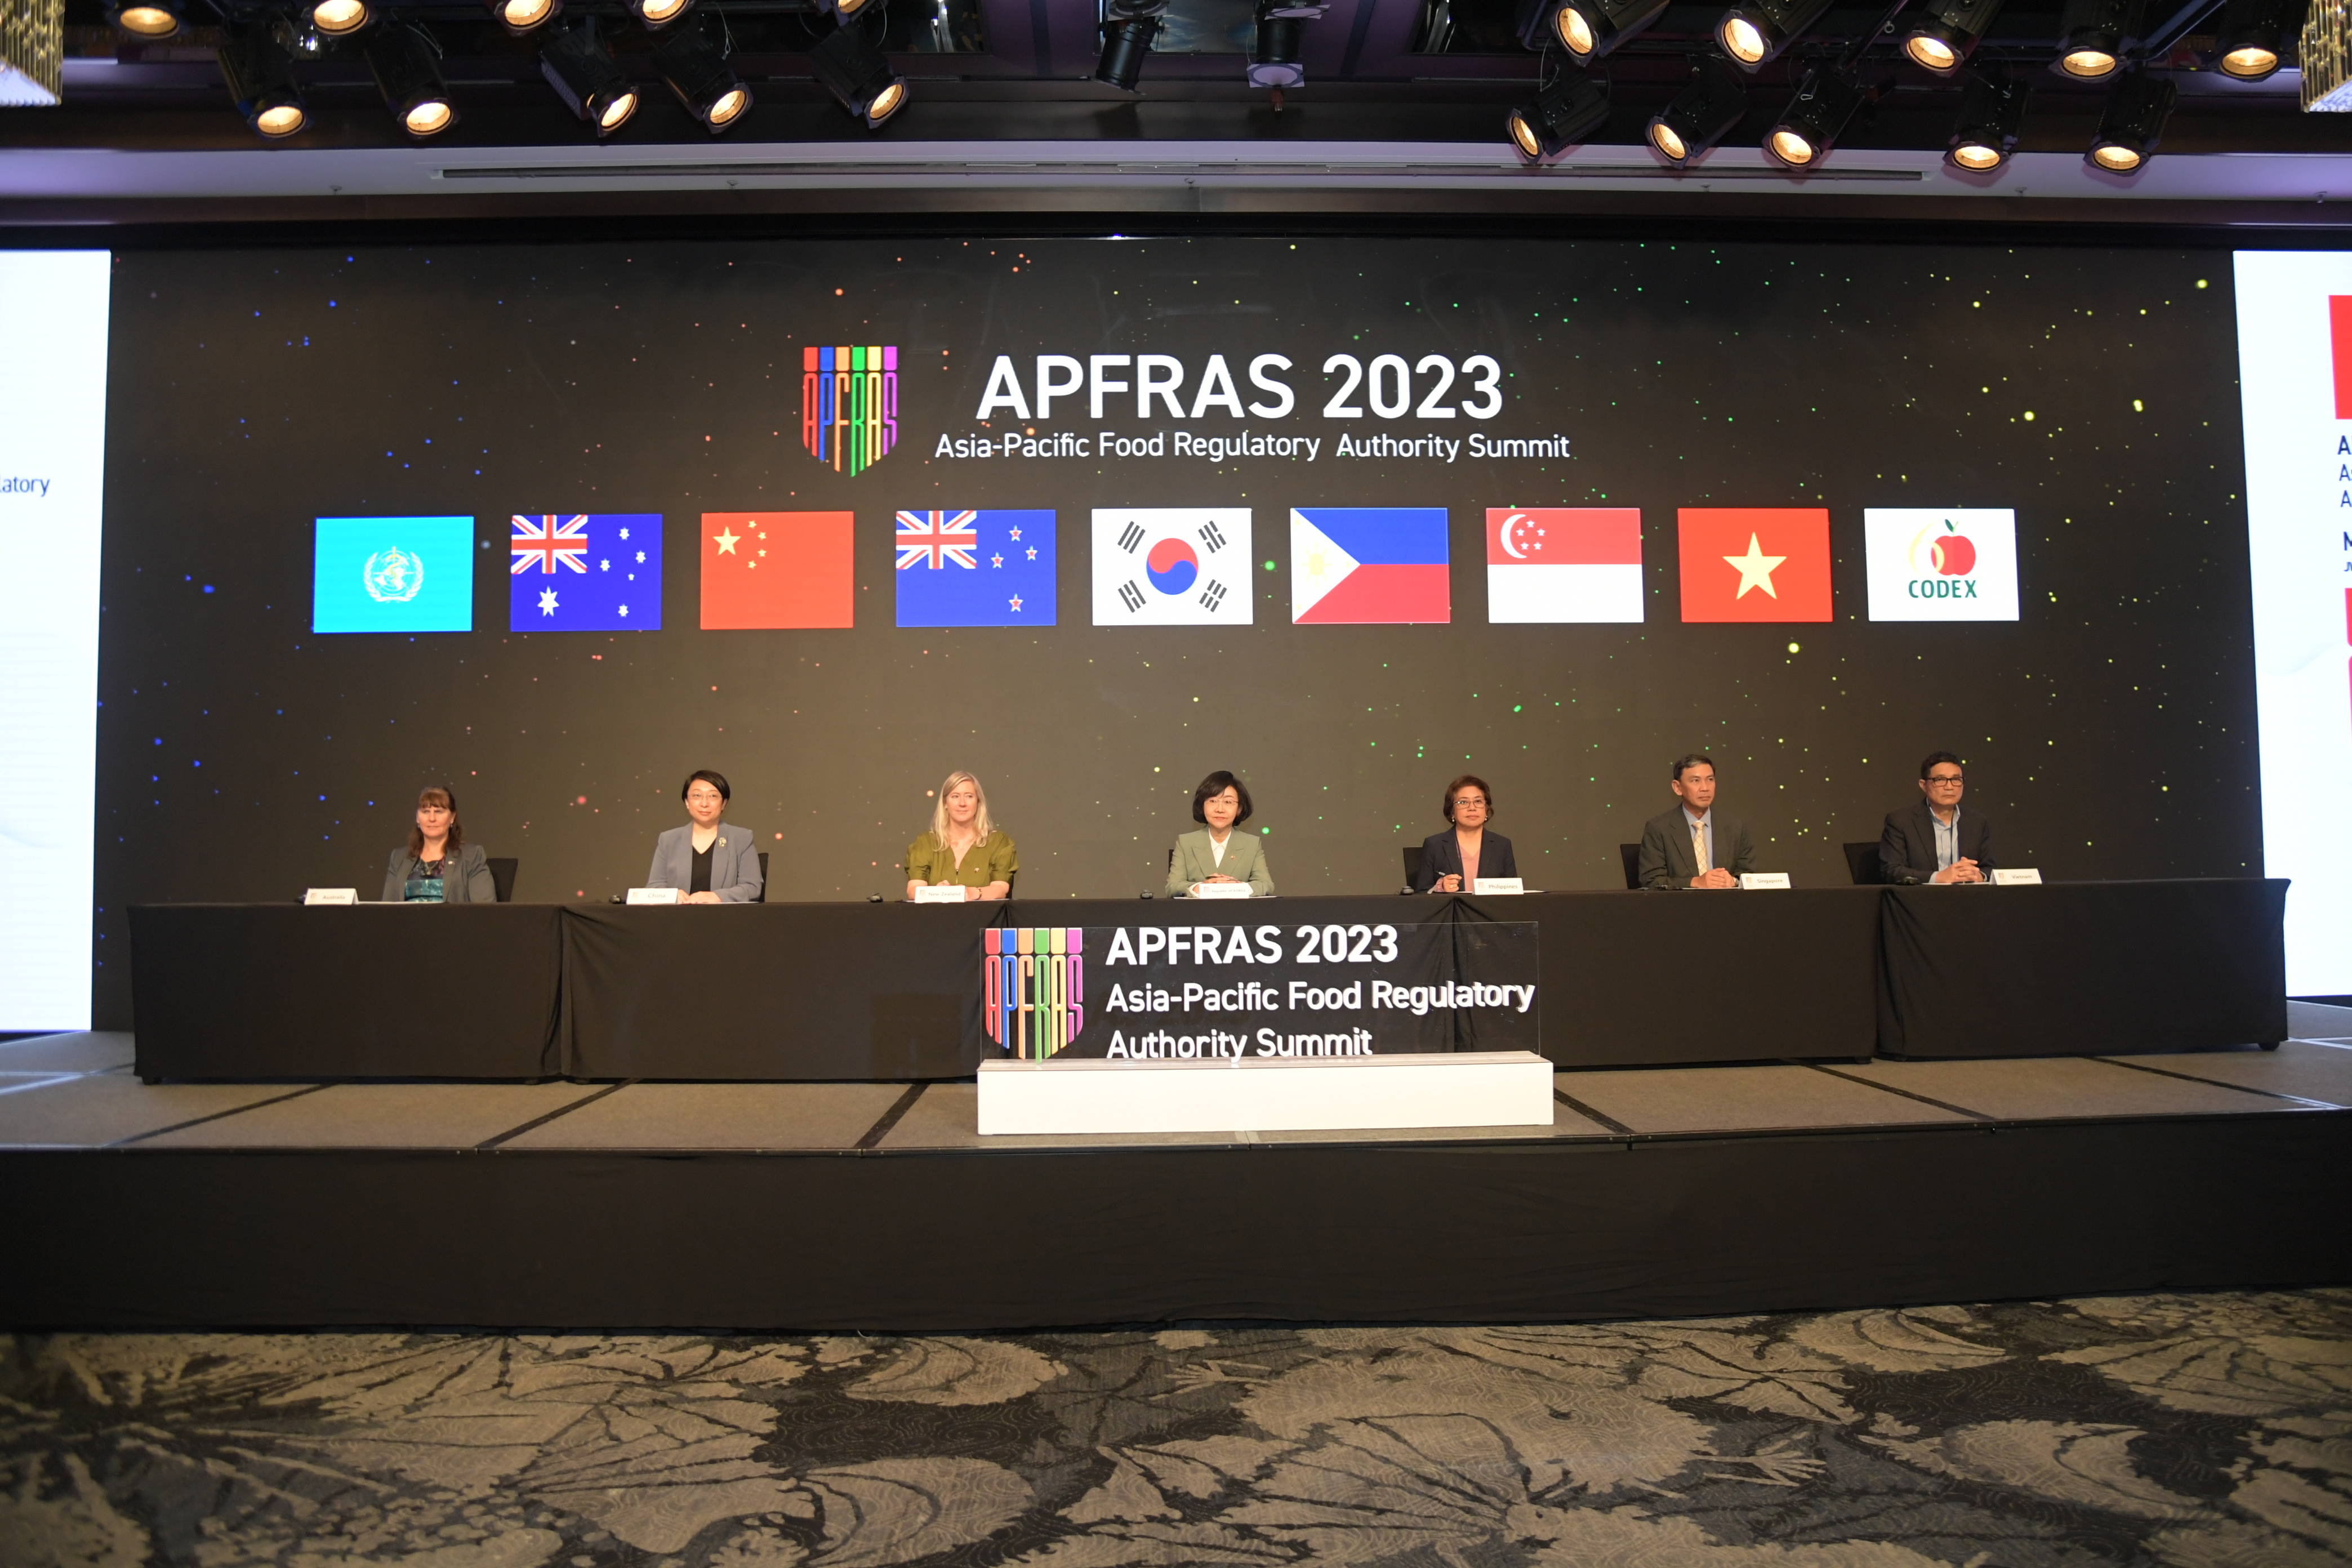 Photo News3 - [May 11, 2023] Minister Attends First Asia-Pacific Food Regulatory Authority Summit (APFRAS 2023) 